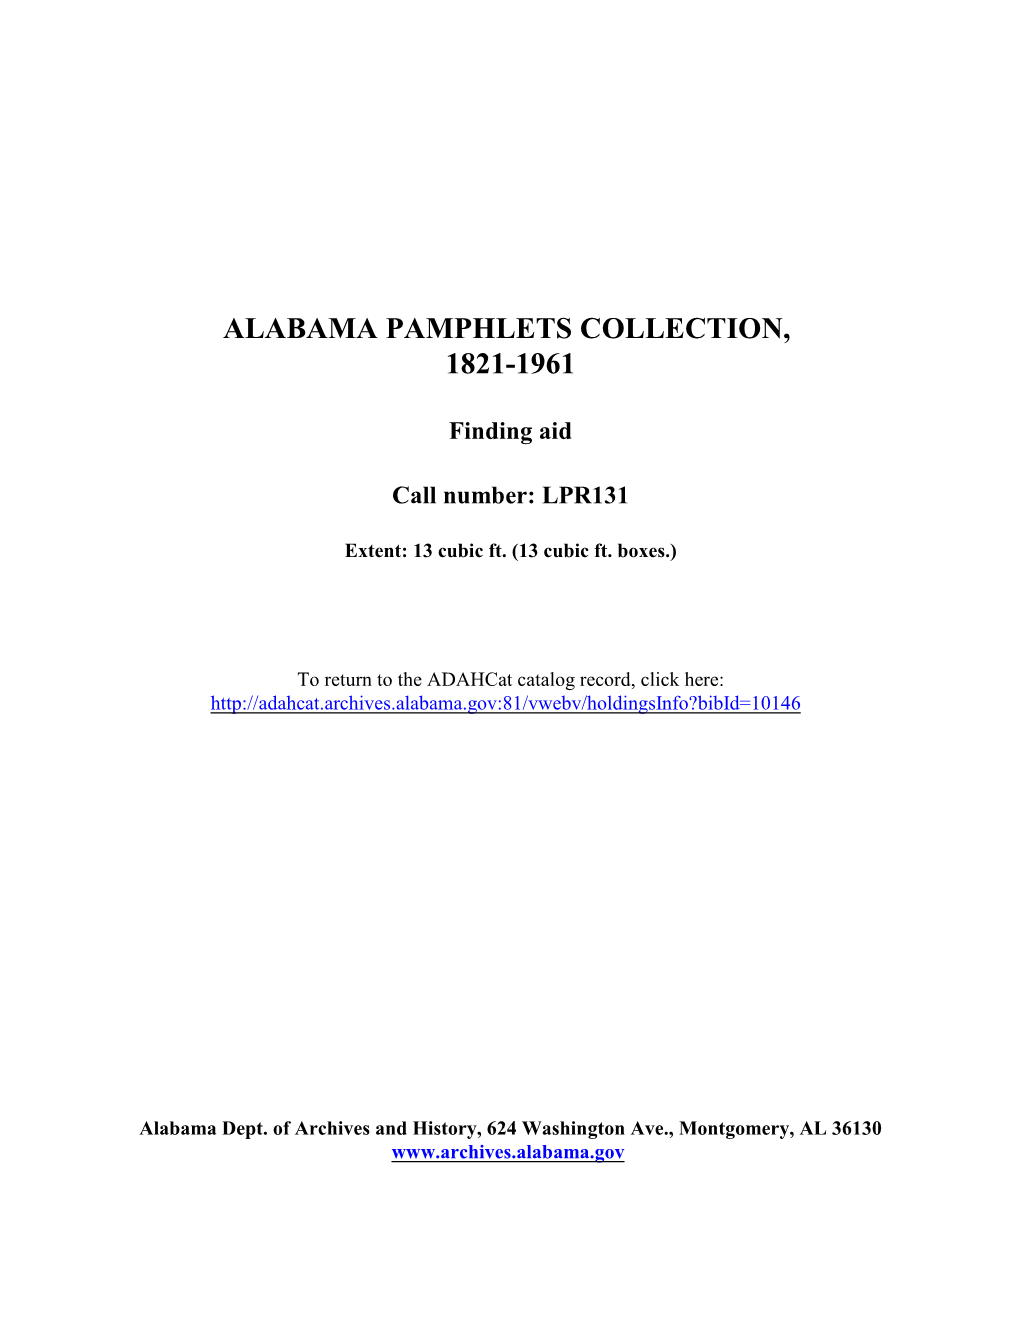 Alabama Pamphlets Collection Finding